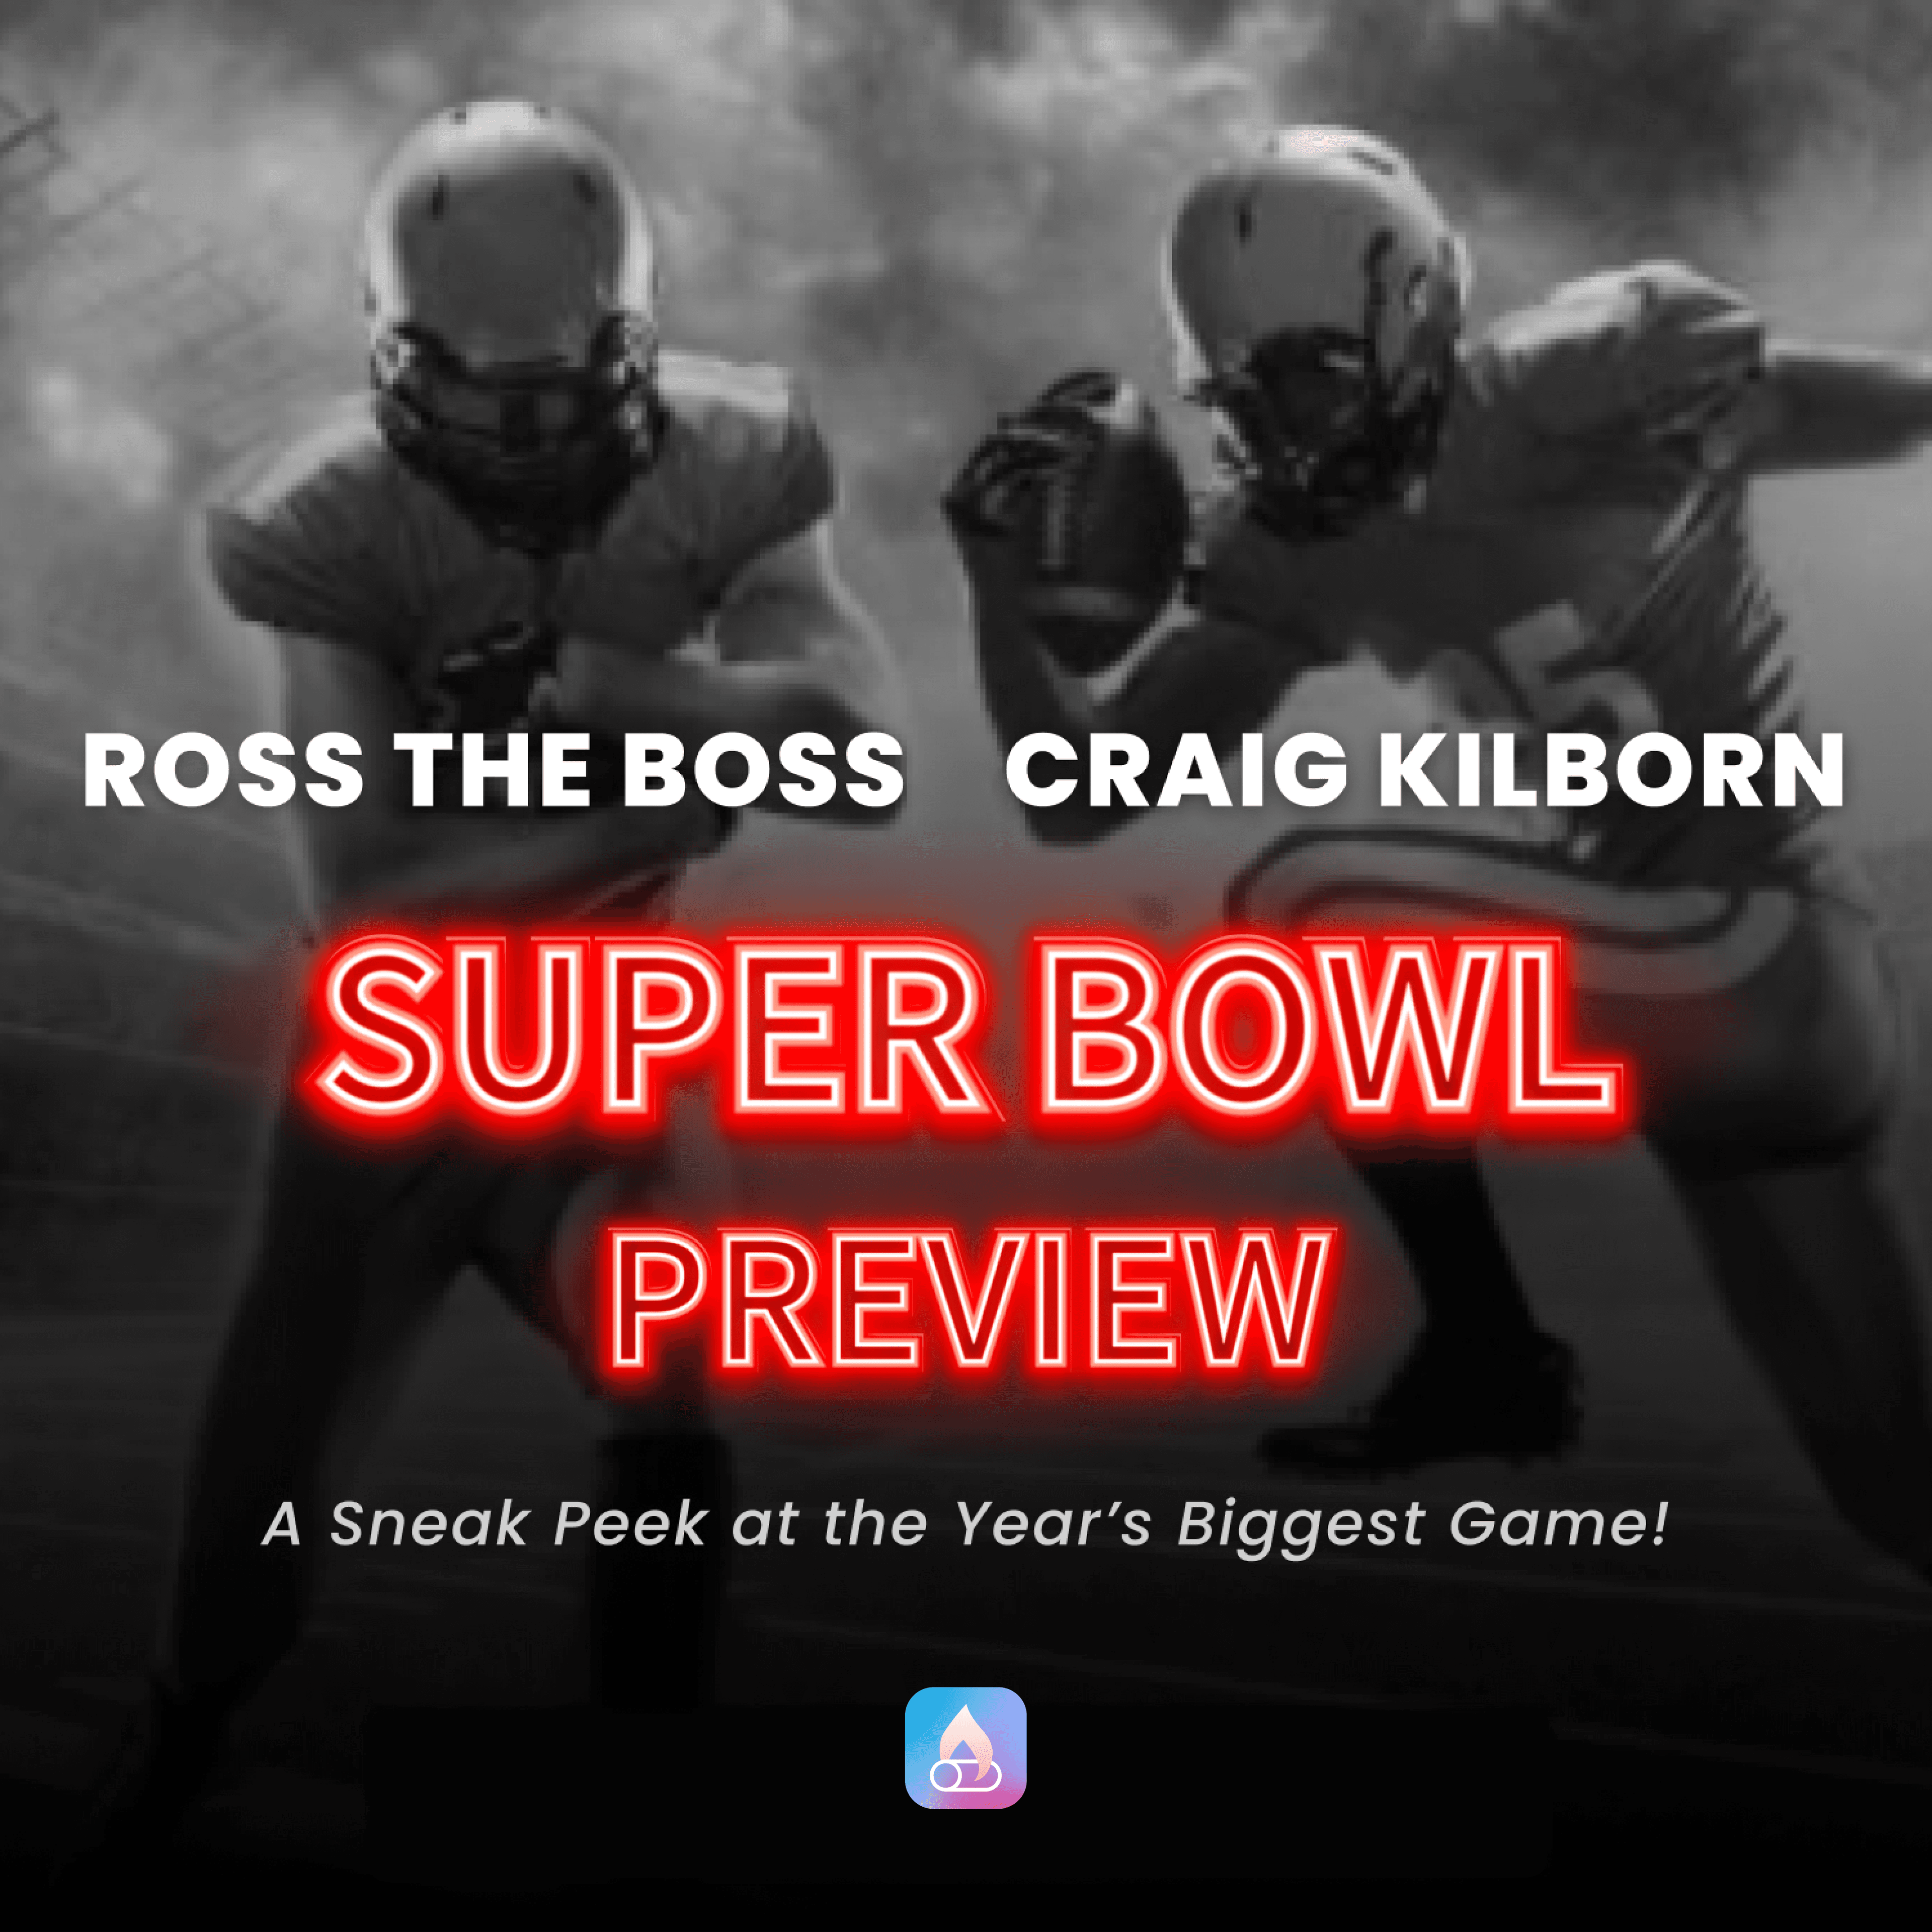 Super Bowl preview show with Craig Kilborn and Ross the Boss